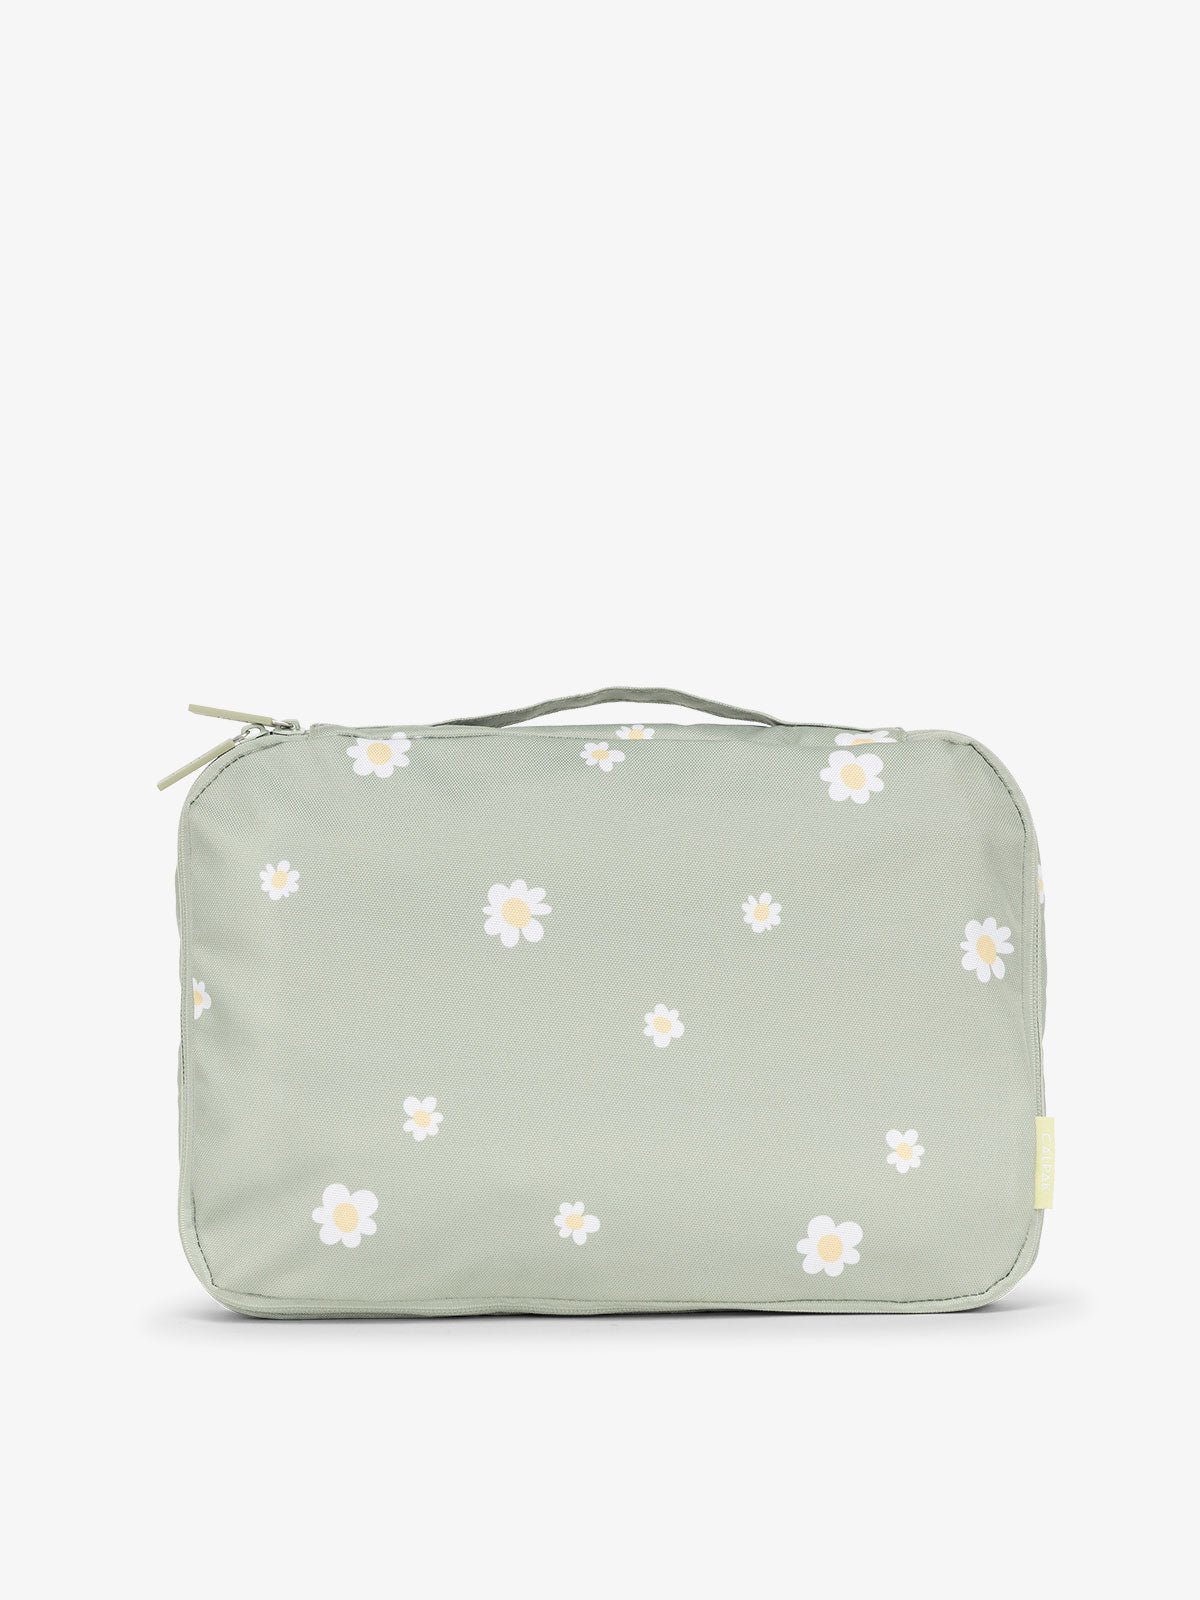 CALPAK packing cubes with top handle in green floral print